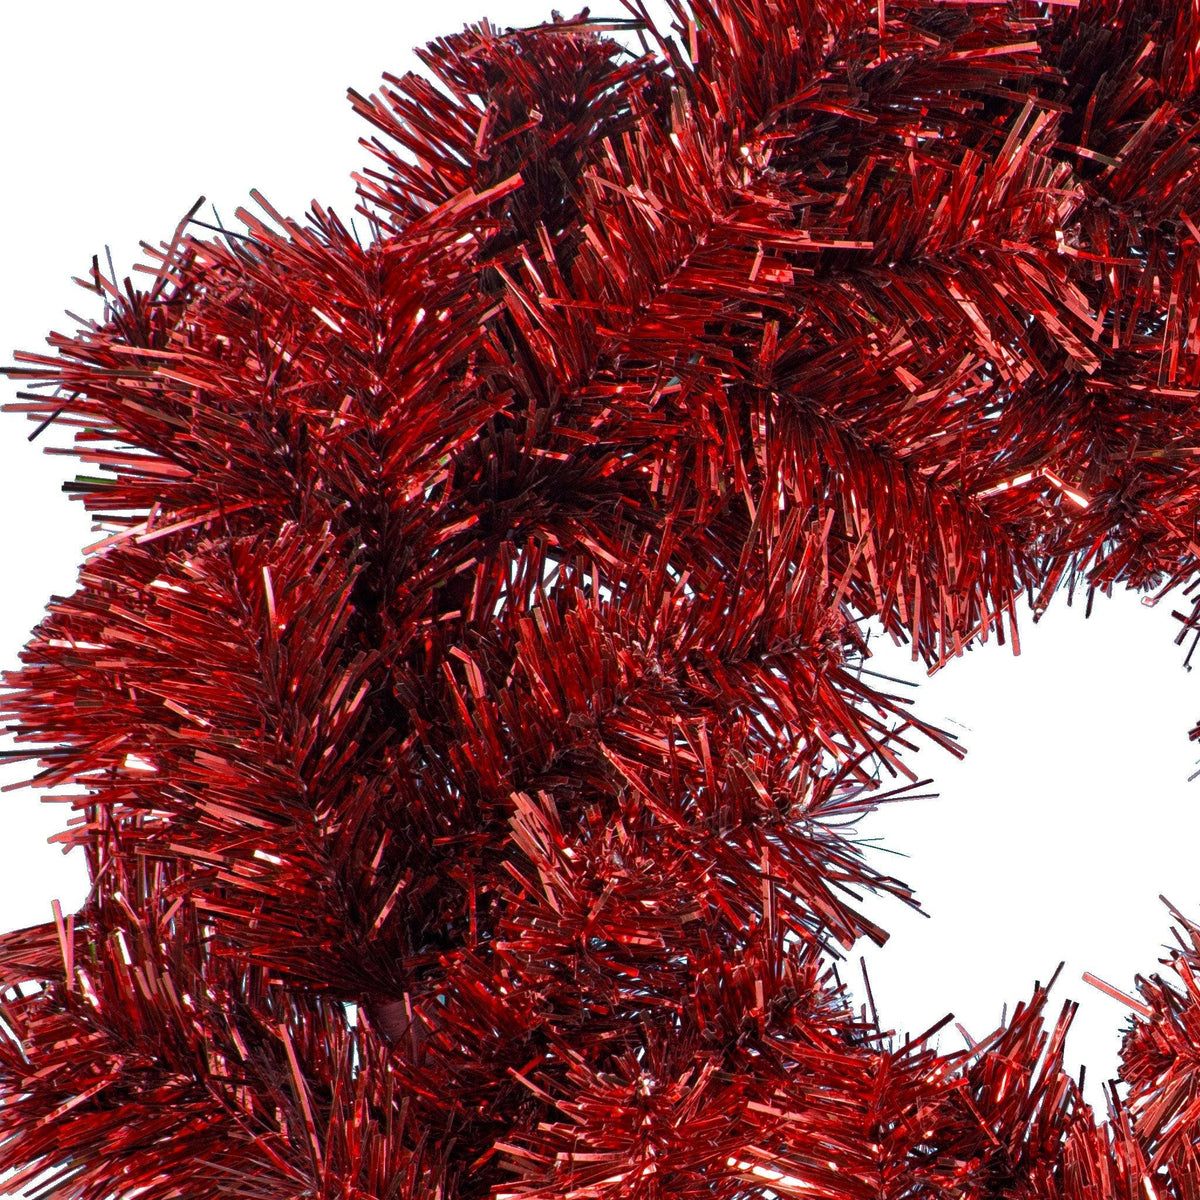 18IN Shiny Red Tinsel Christmas Wreaths! Decorative 18in Diameter door hanging wreaths made by Lee Display.